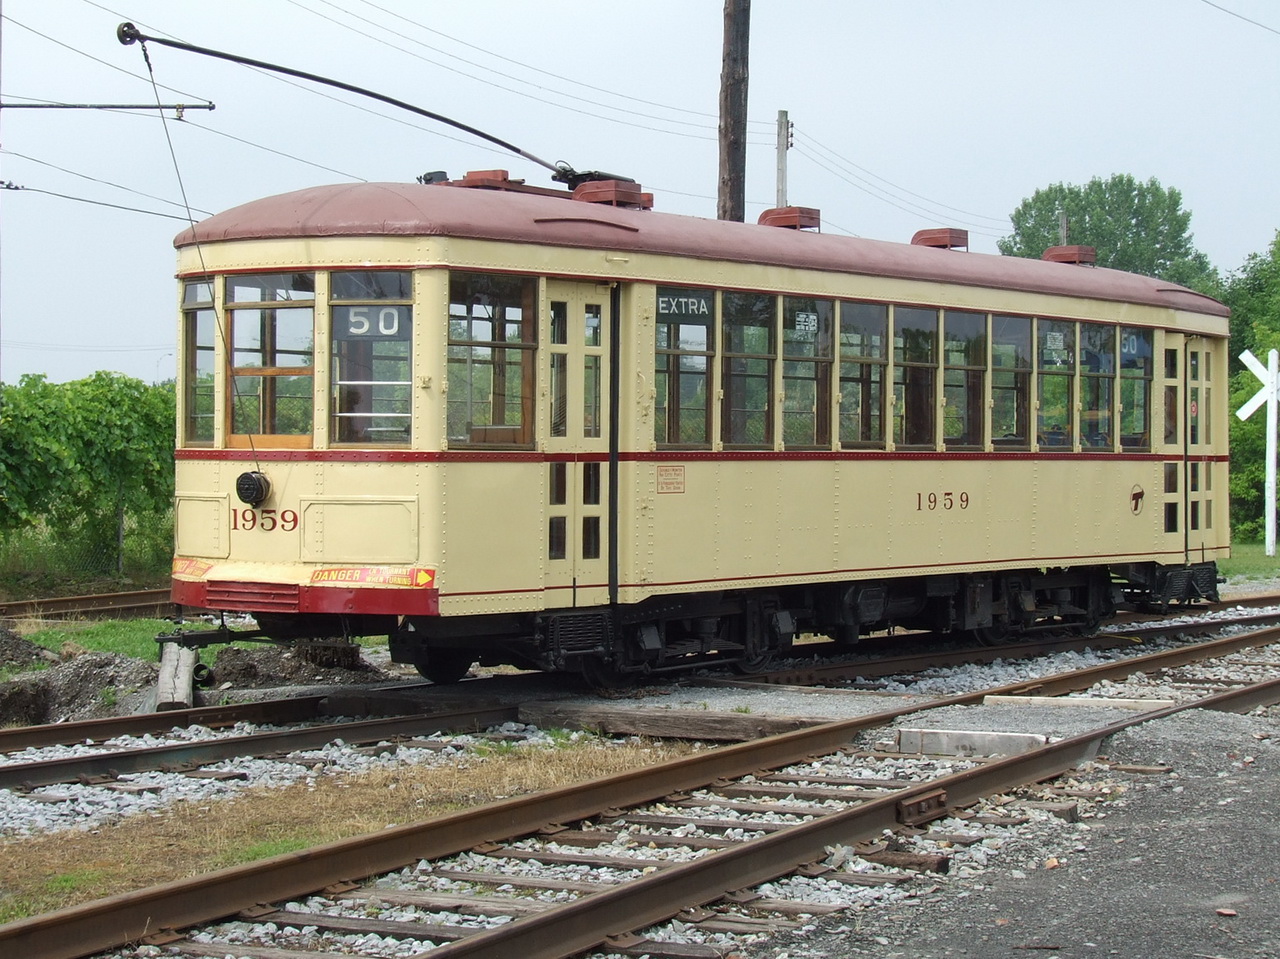 A Montreal streetcar retired in 1959 still used to ride visitors in the museum yard.